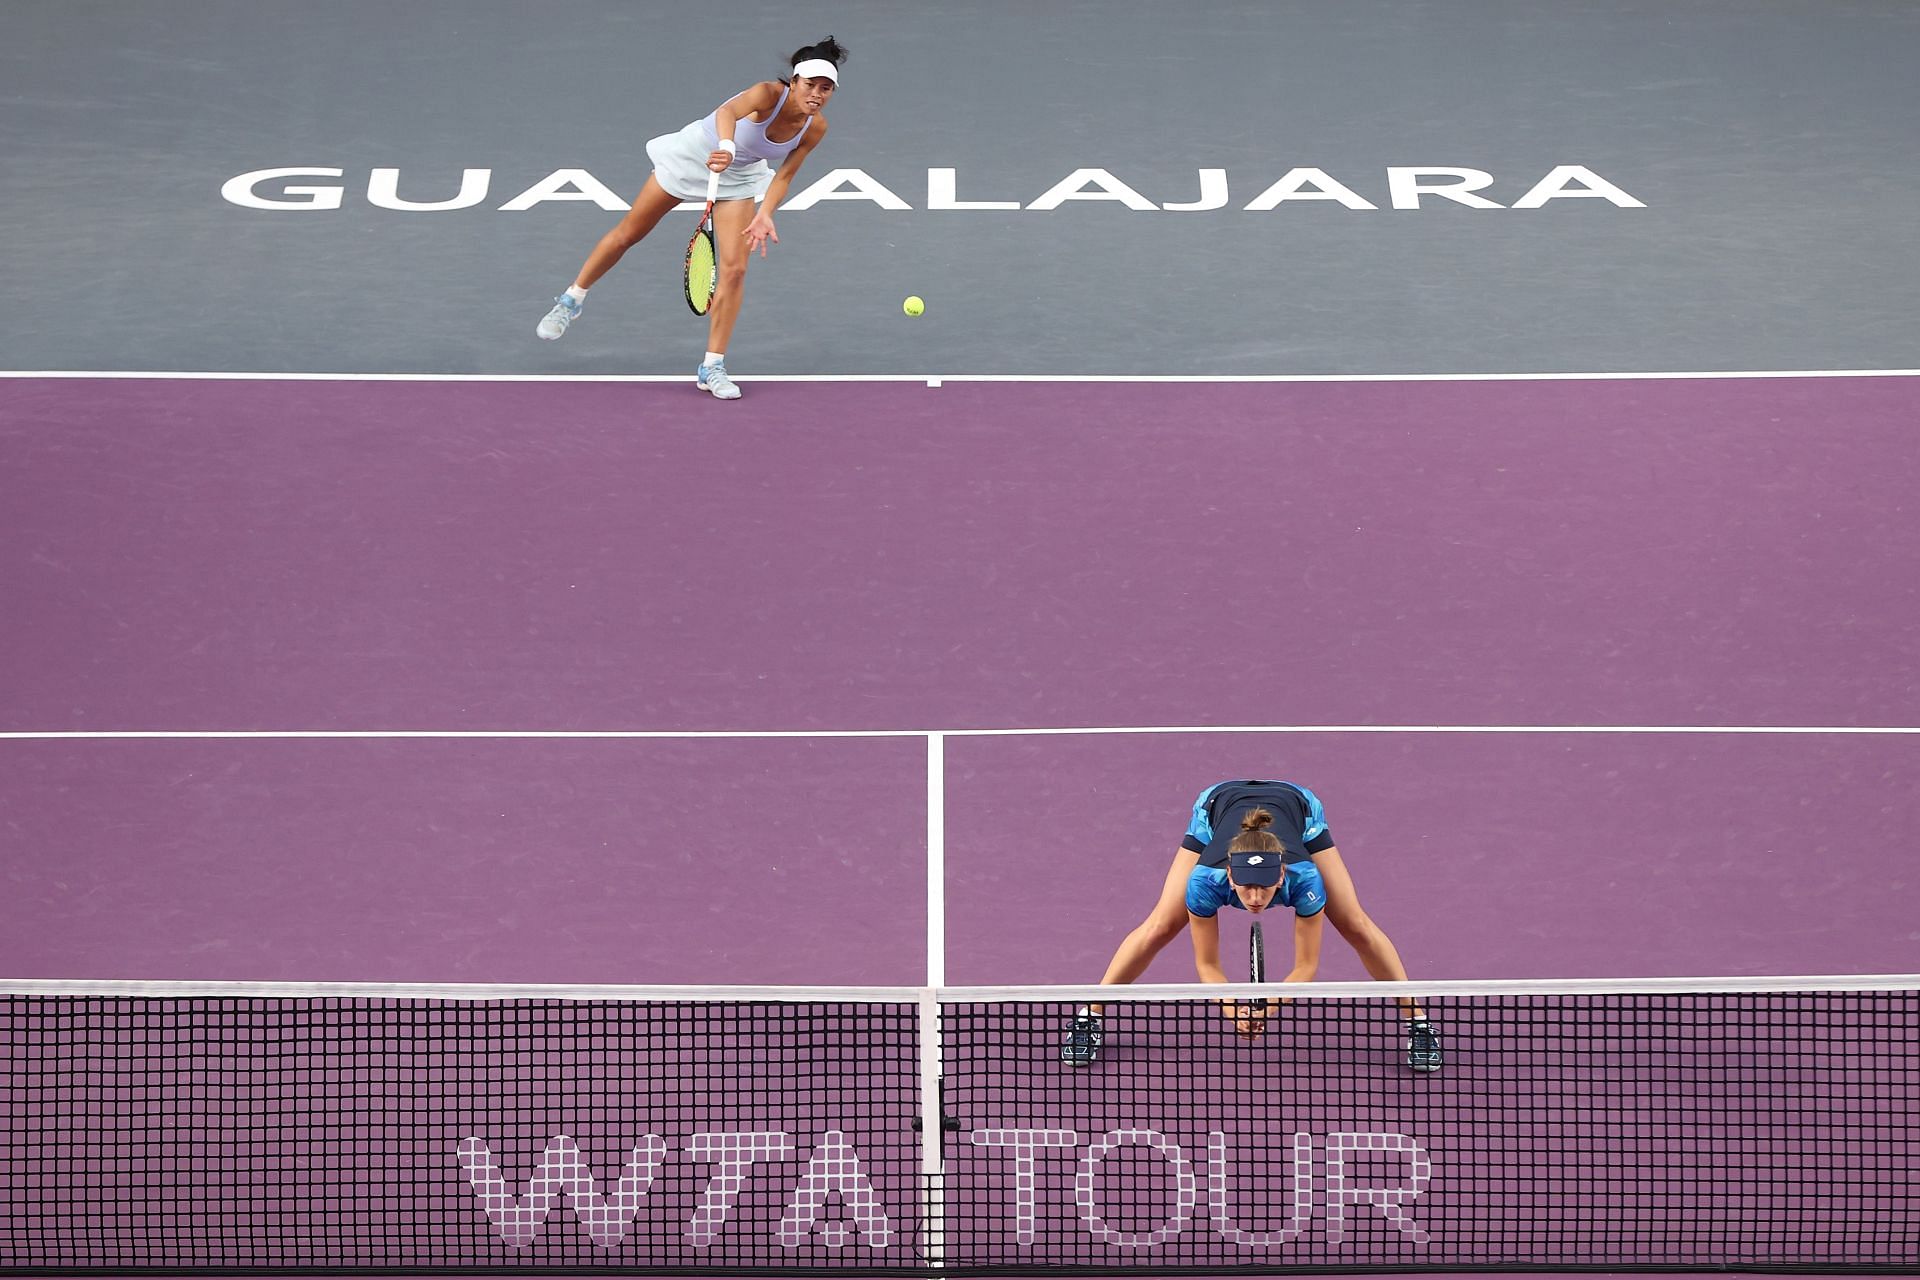 The 2021 WTA finals was already moved from China to Guadalajara